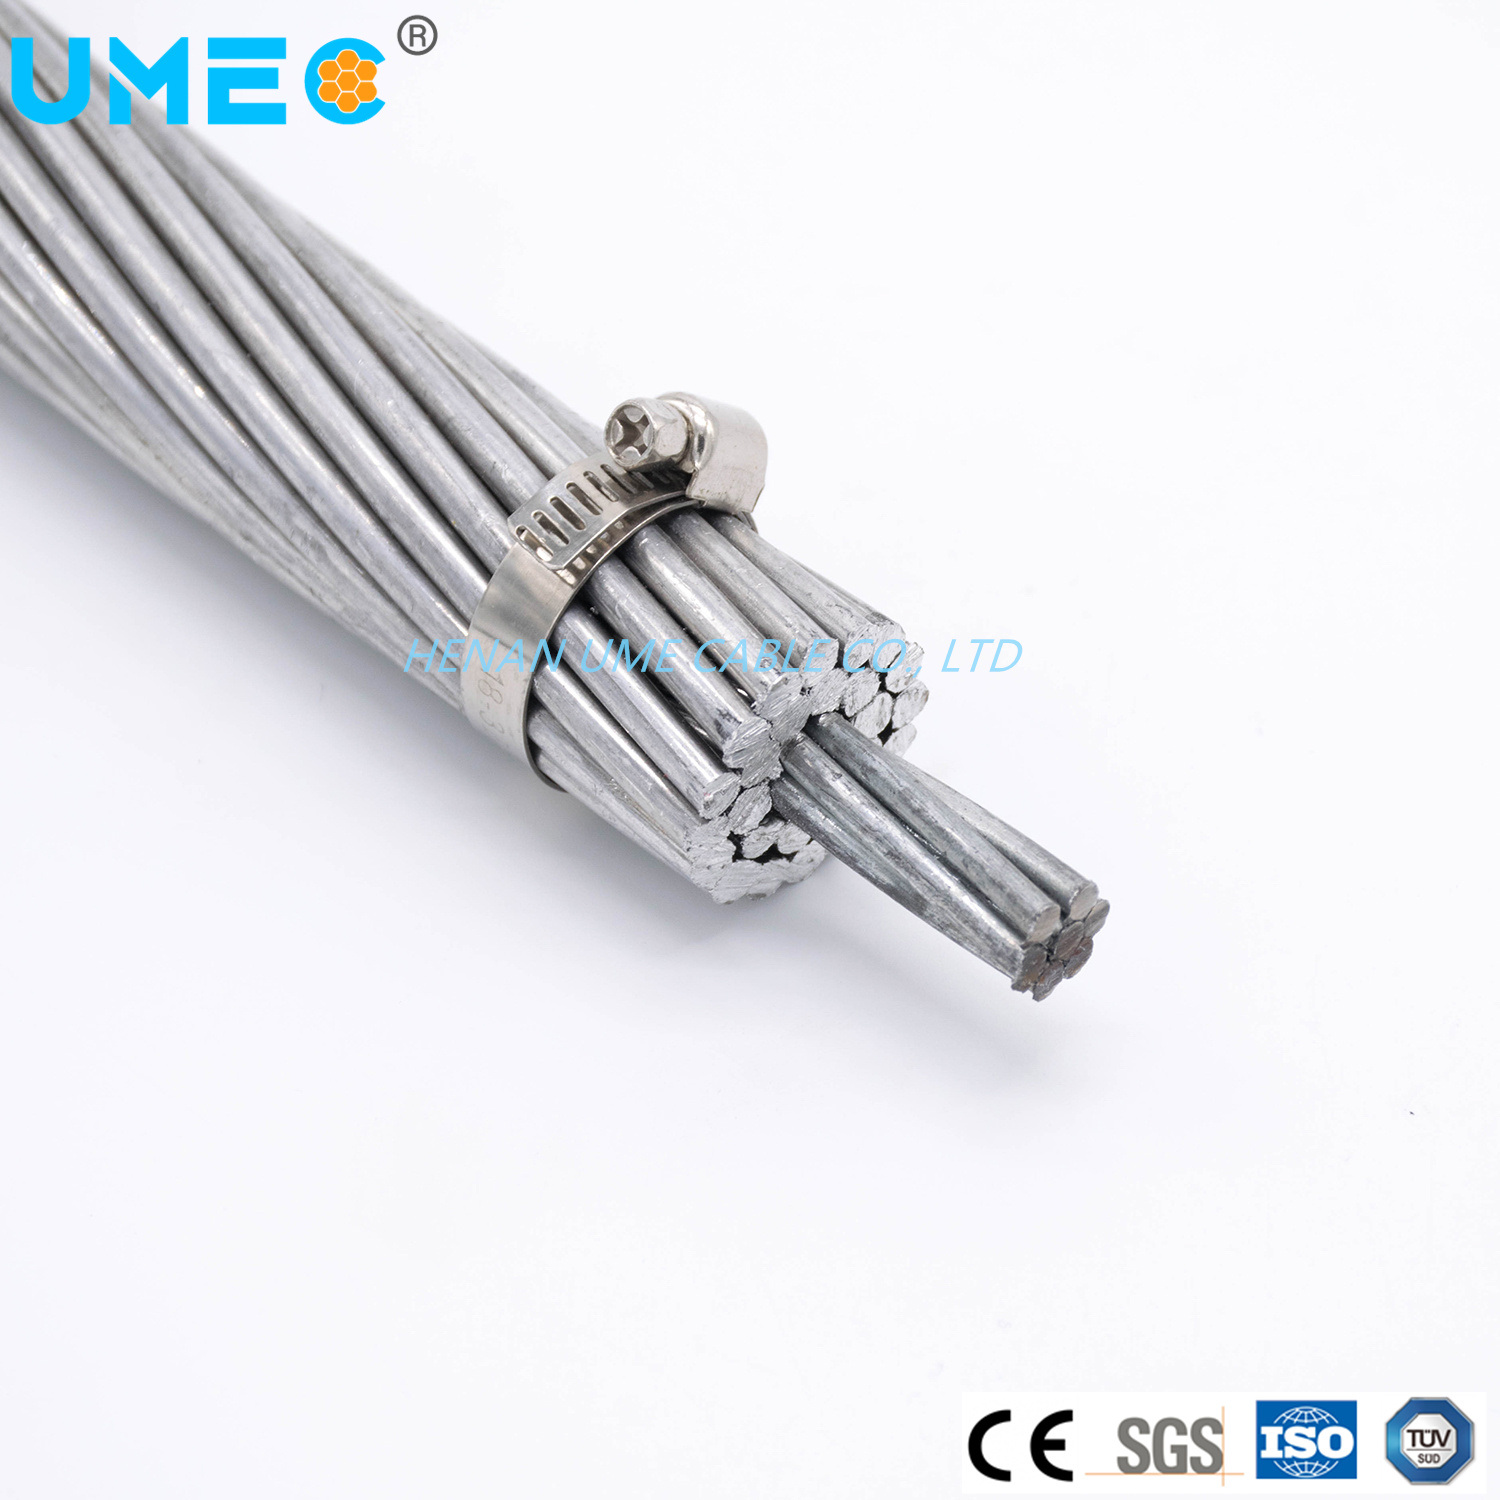 Power Transmission Line Aluminum Conductor Steel Reinforced ACSR/Aw